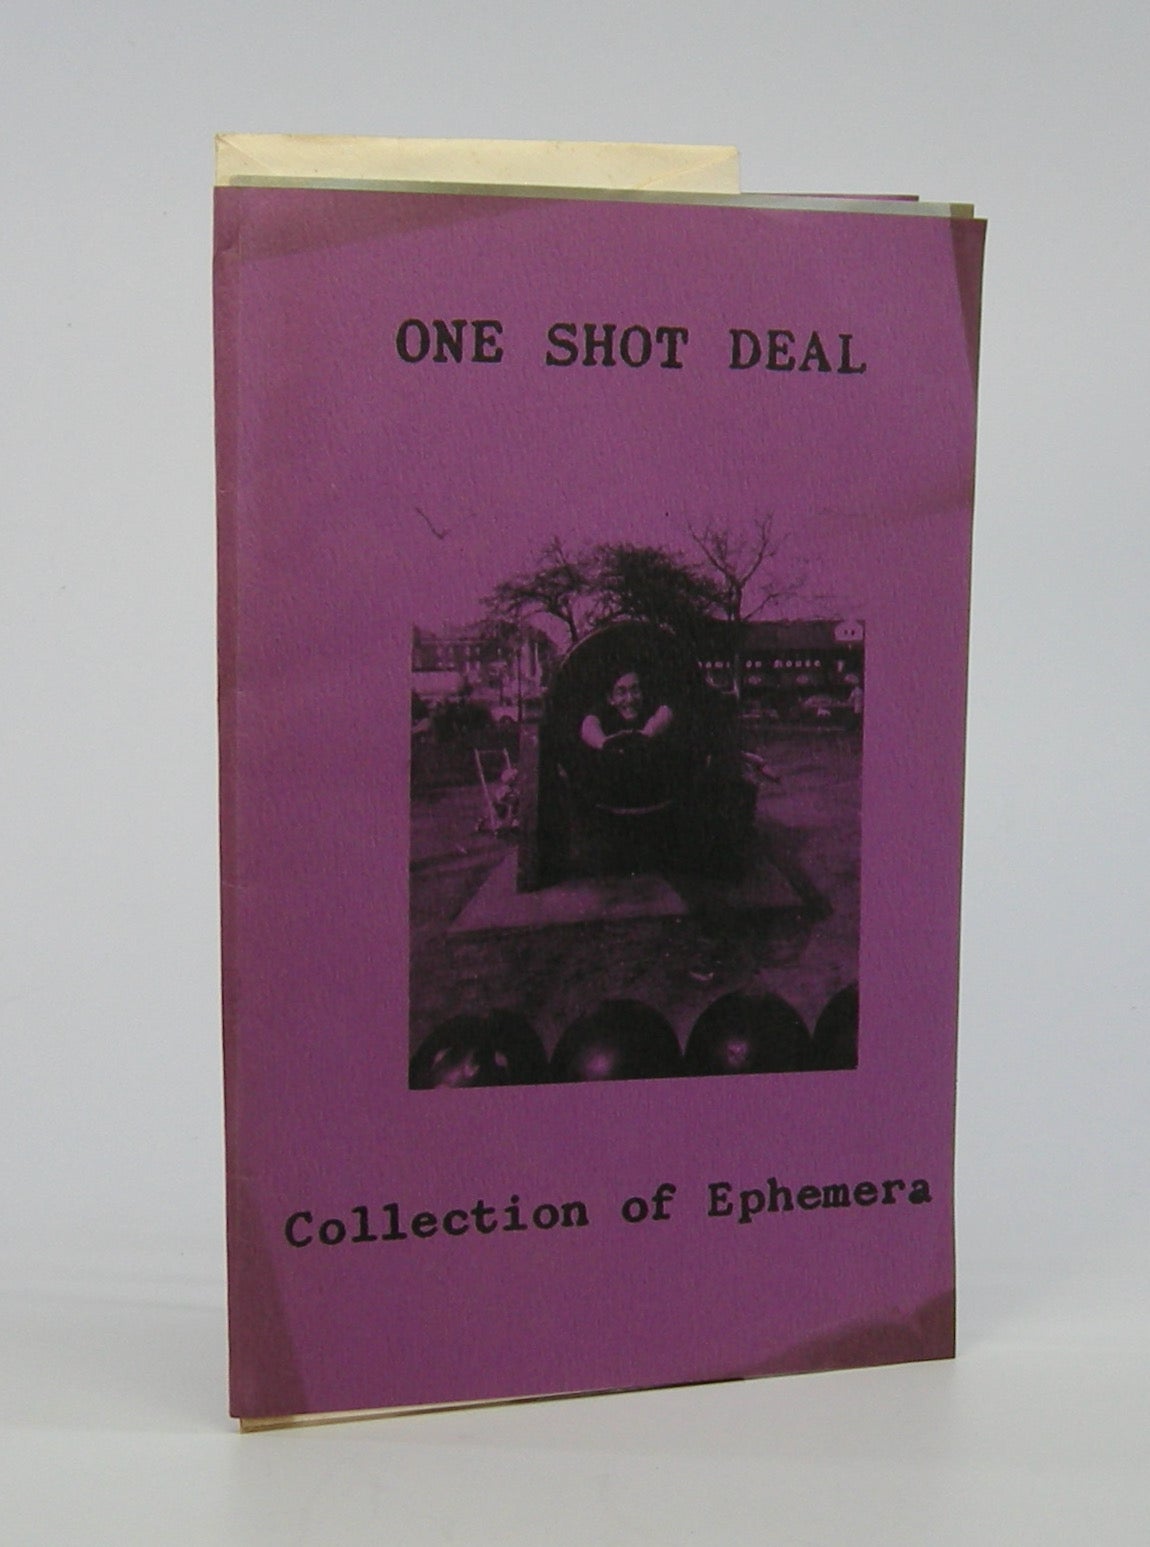 One Shot Deal; A Collection of Ephemera, Larry Zirlin